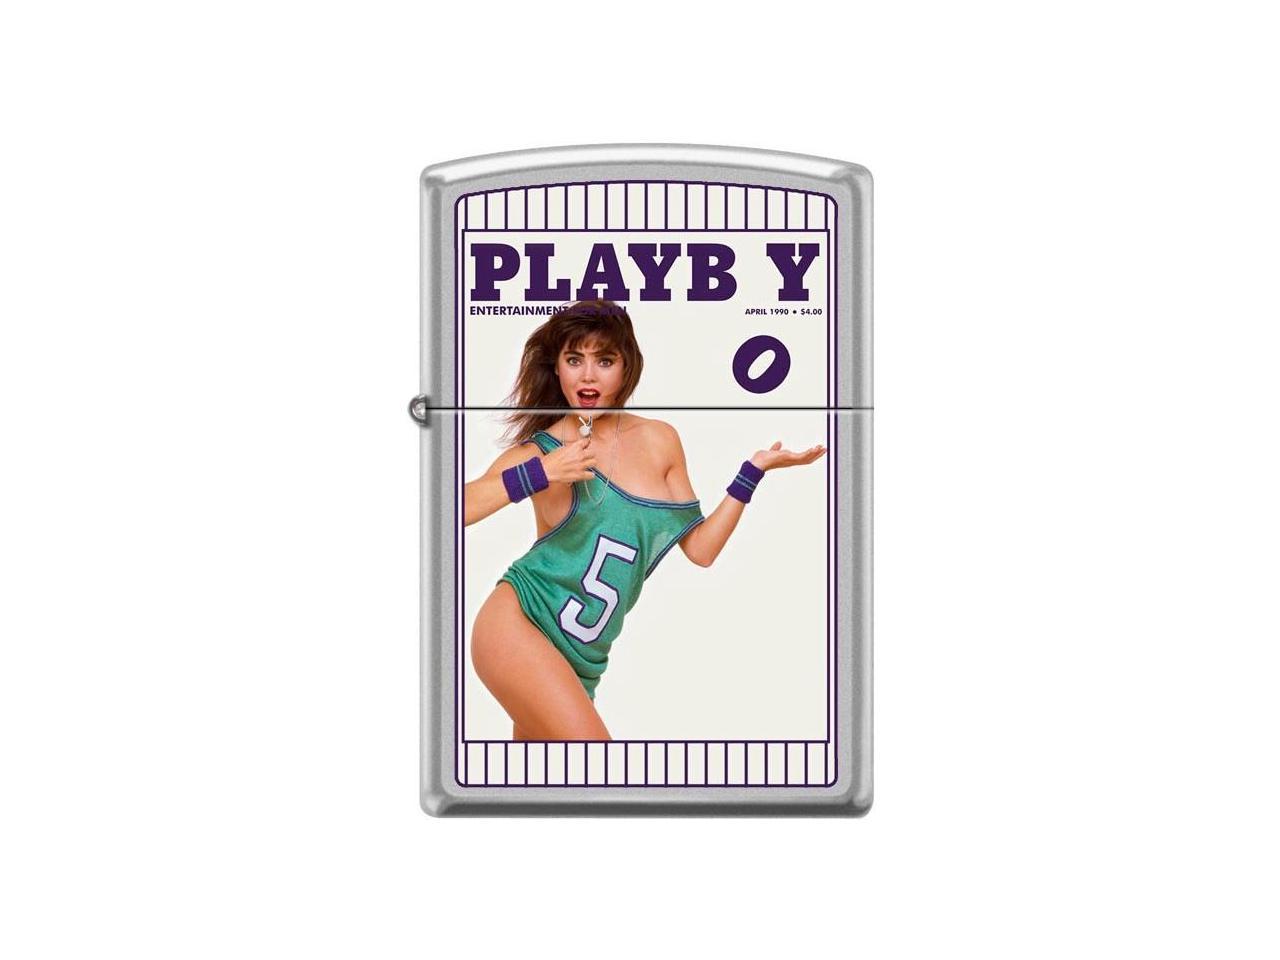 Zippo 4759 Playboy April 1990 Lighter with PIPE INSERT PL 